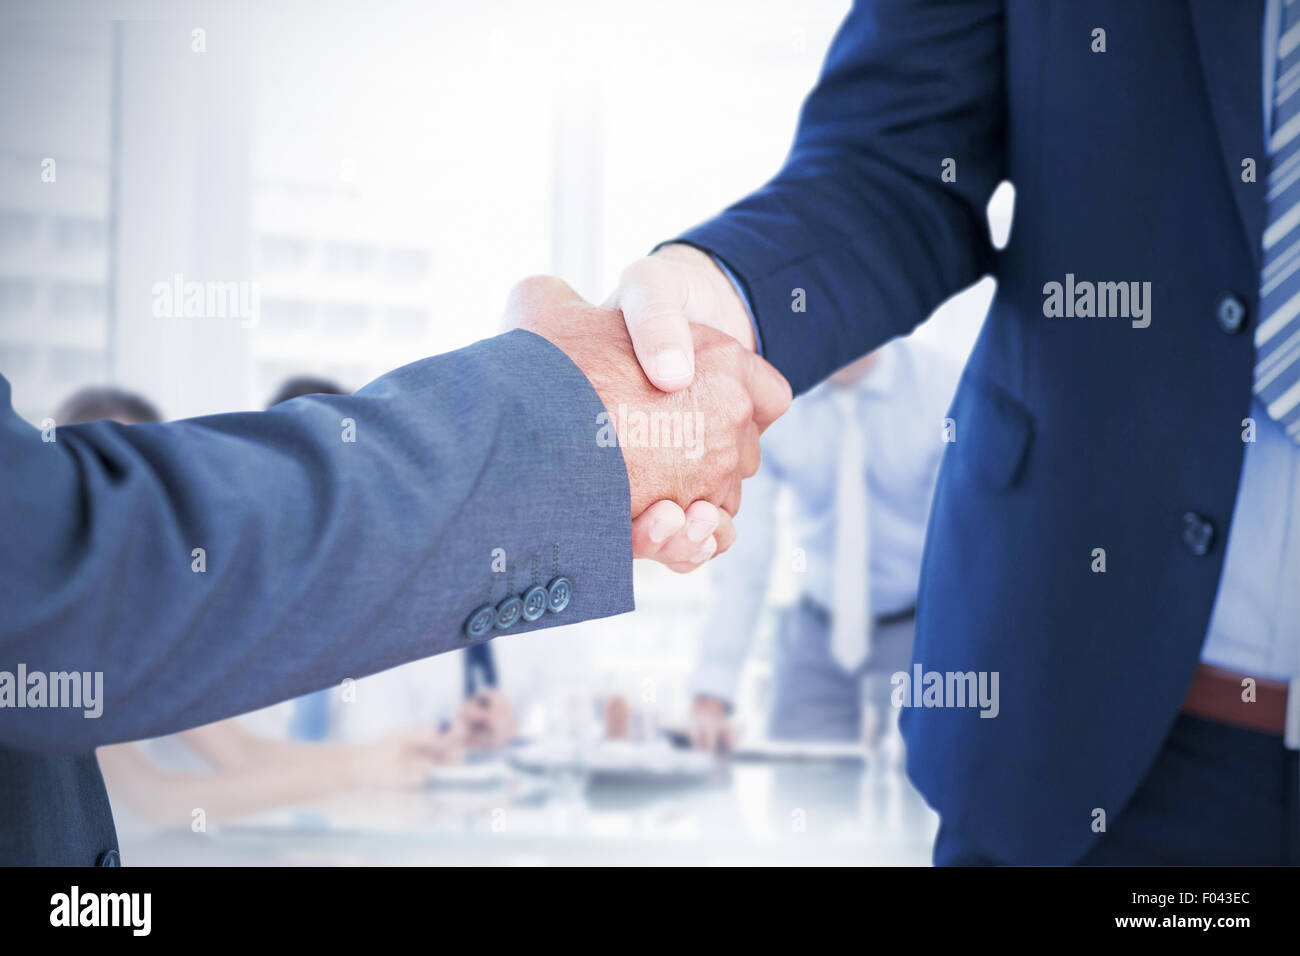 Composite image of businessmen shaking hands Stock Photo